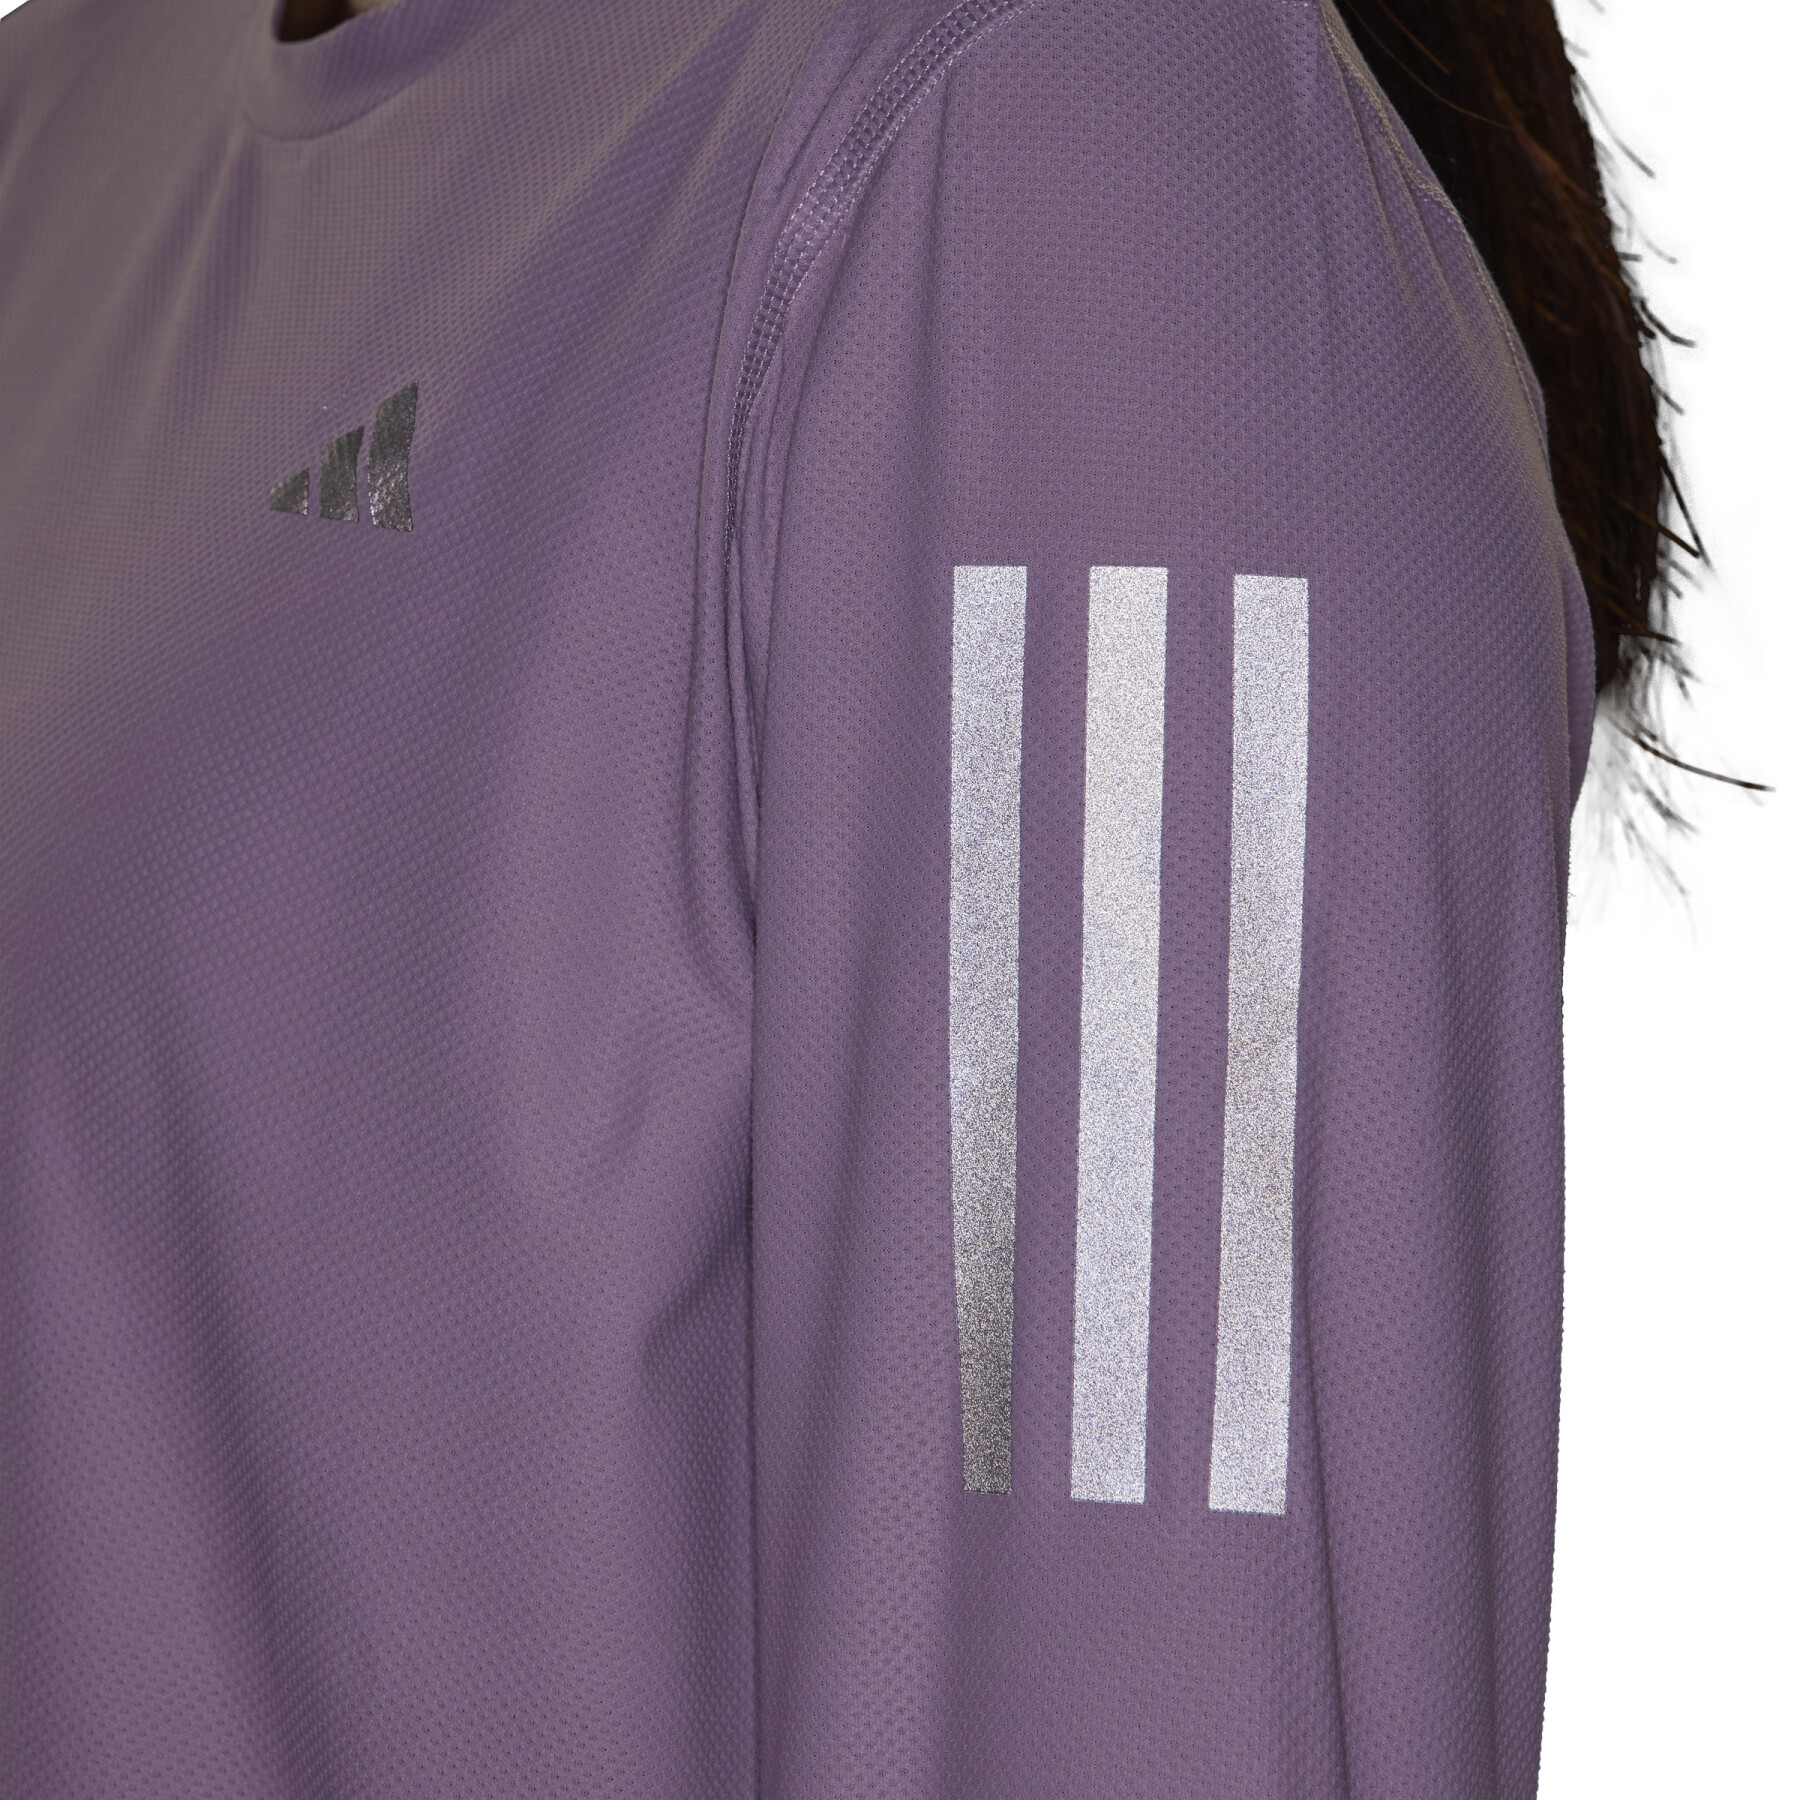 Maillot manches longues femme adidas Own the Run